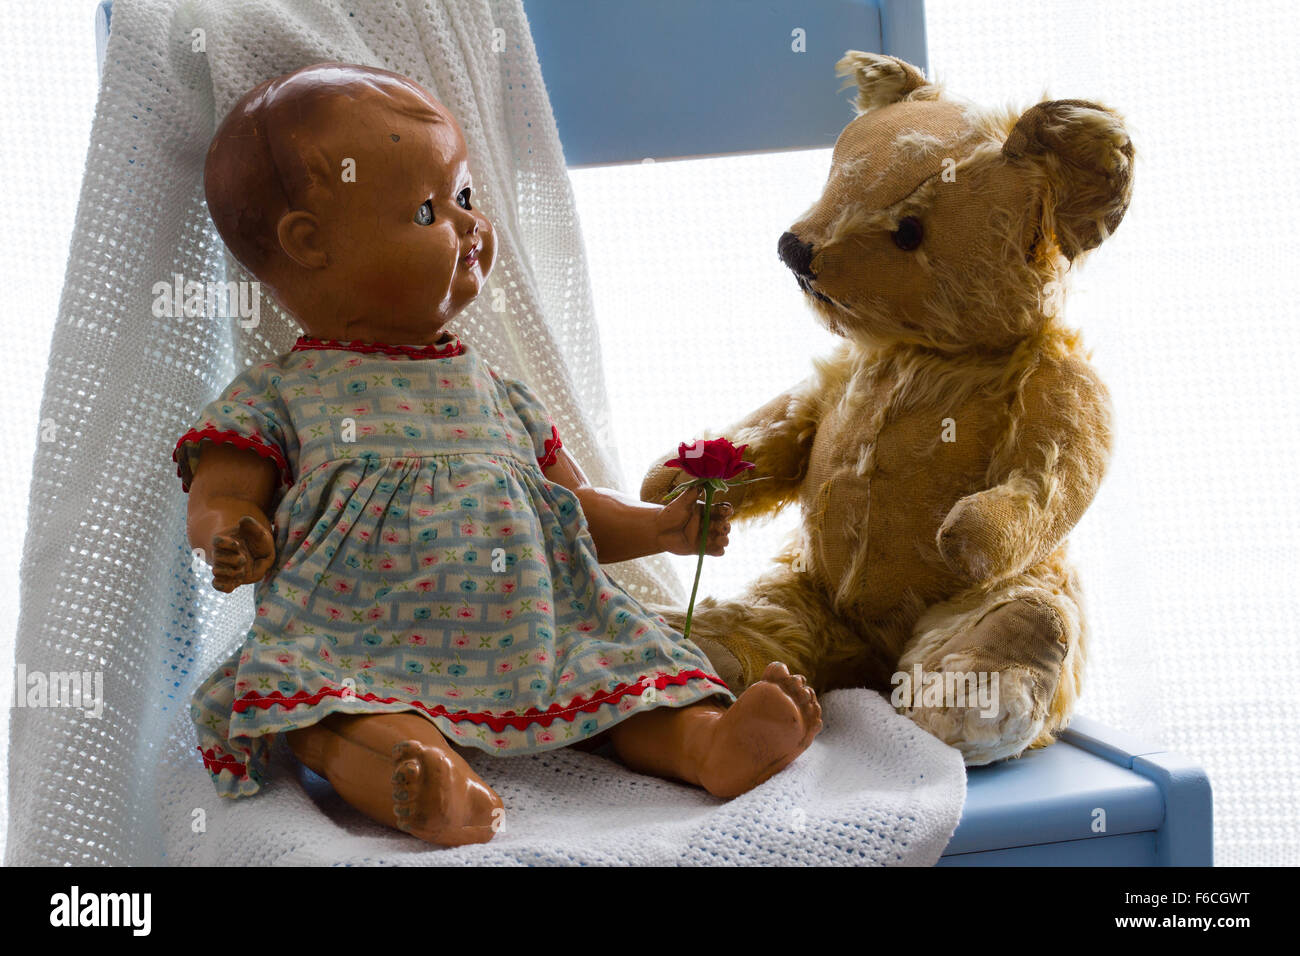 Story, concept. Antique teddy bear appears to accept a fresh red rose from a vintage ceramic doll. White background, copyspace Stock Photo